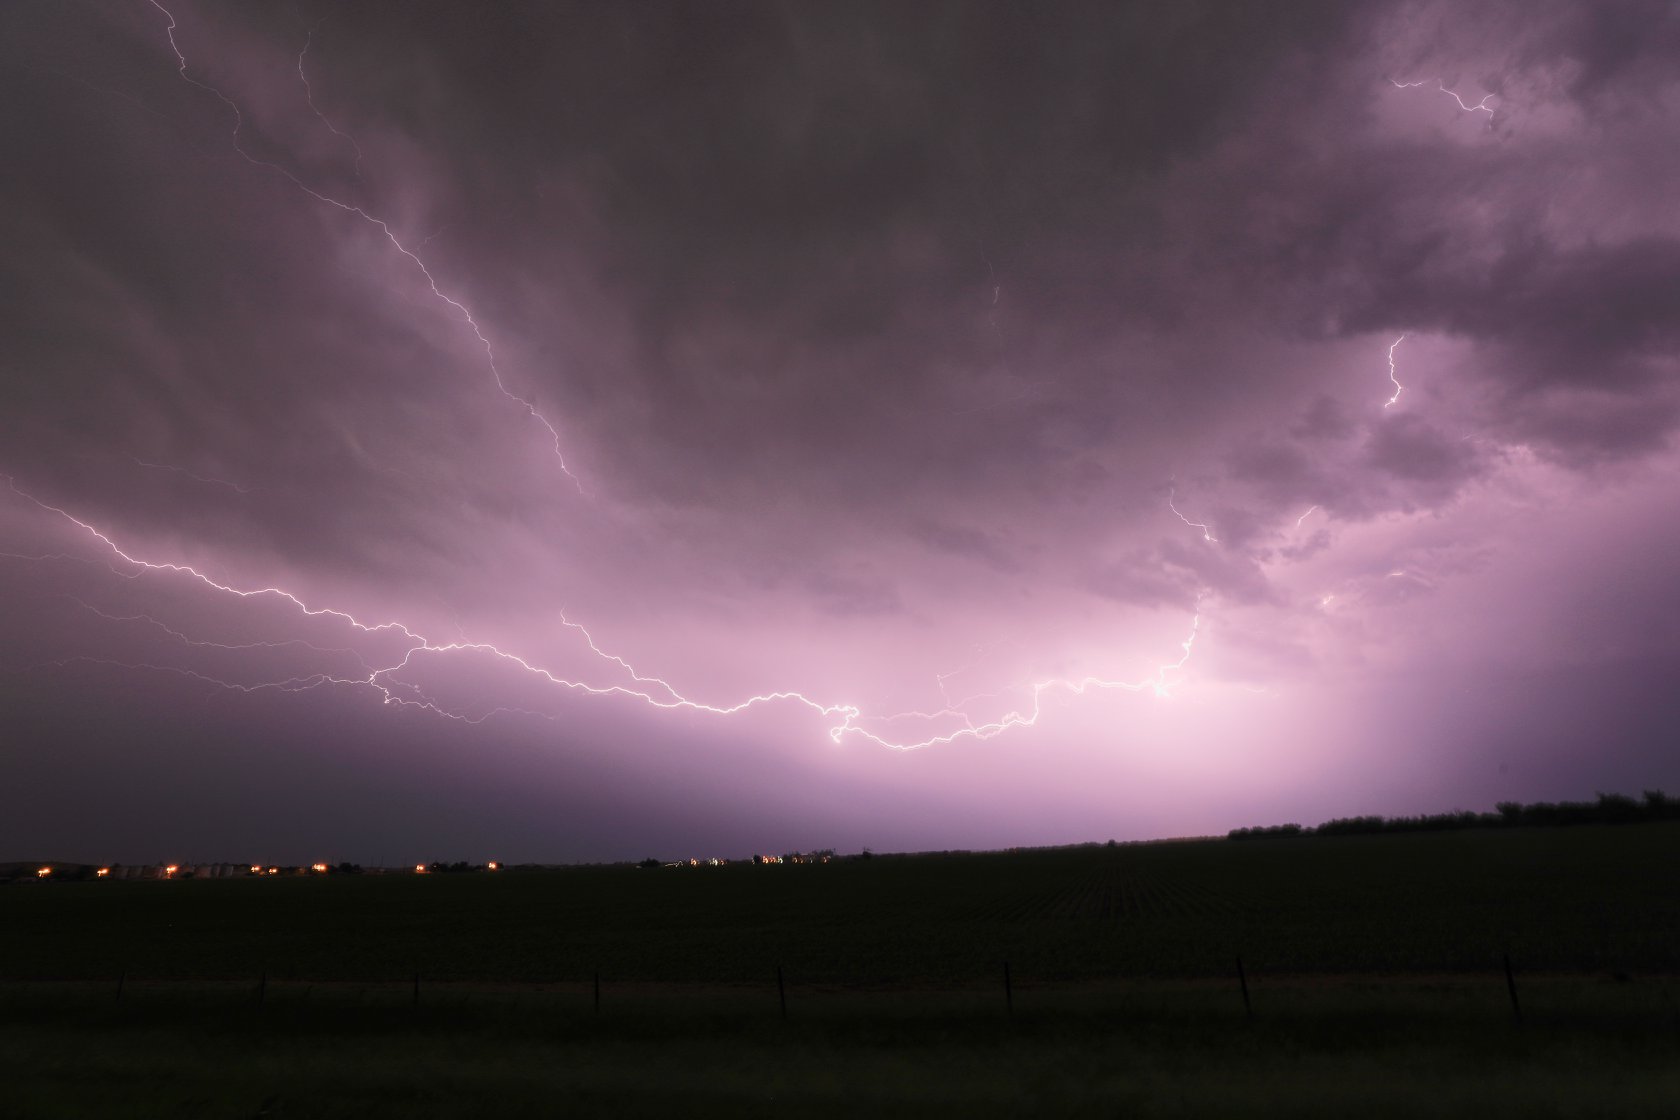 Fredrick Muscat - Photographer and I enjoyed this night in South Dakota after a tornado warning!

Congratulations to WIlloughby's crew for that insane...